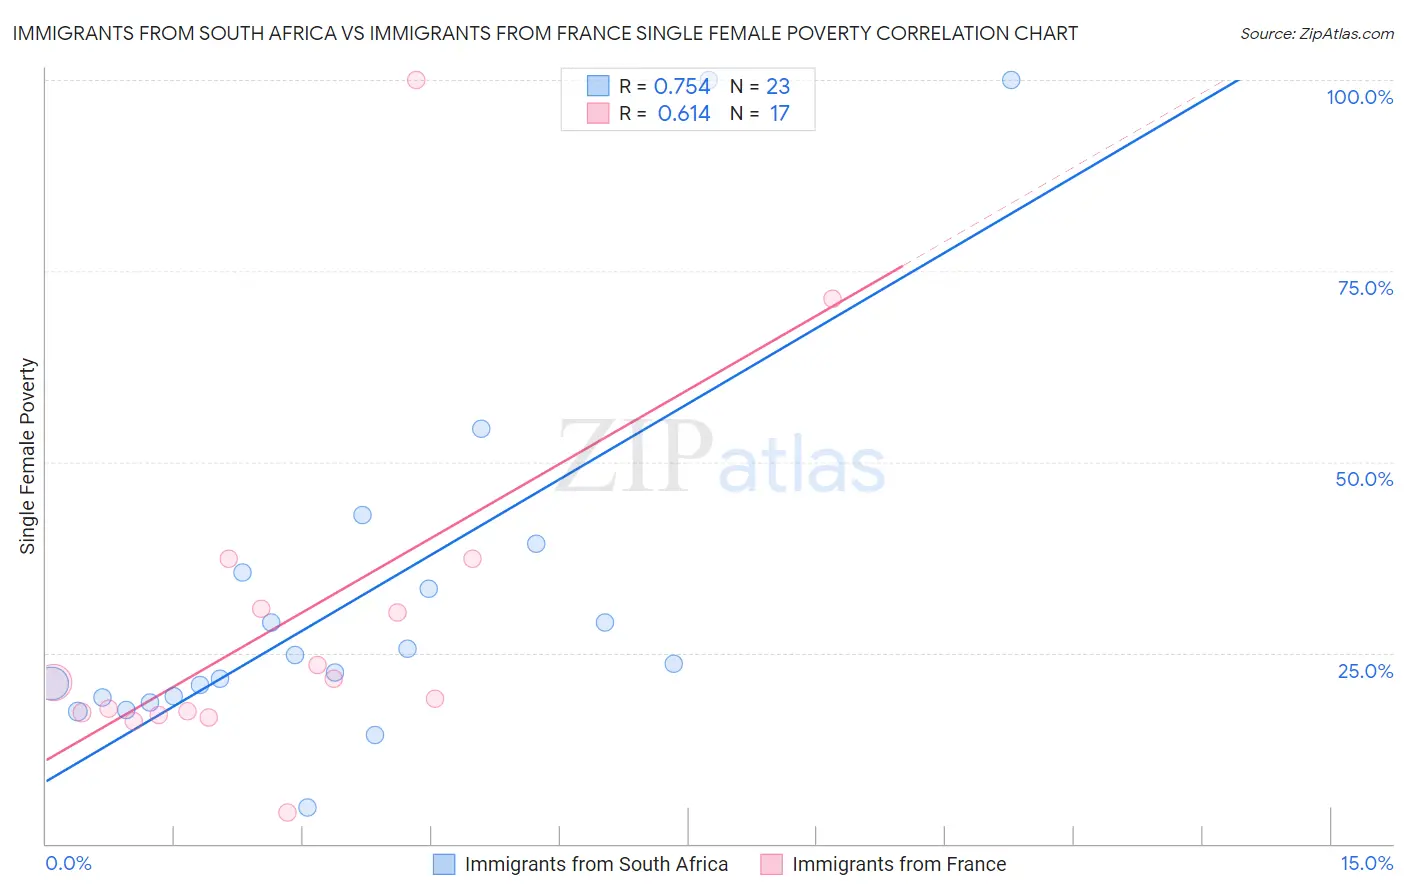 Immigrants from South Africa vs Immigrants from France Single Female Poverty